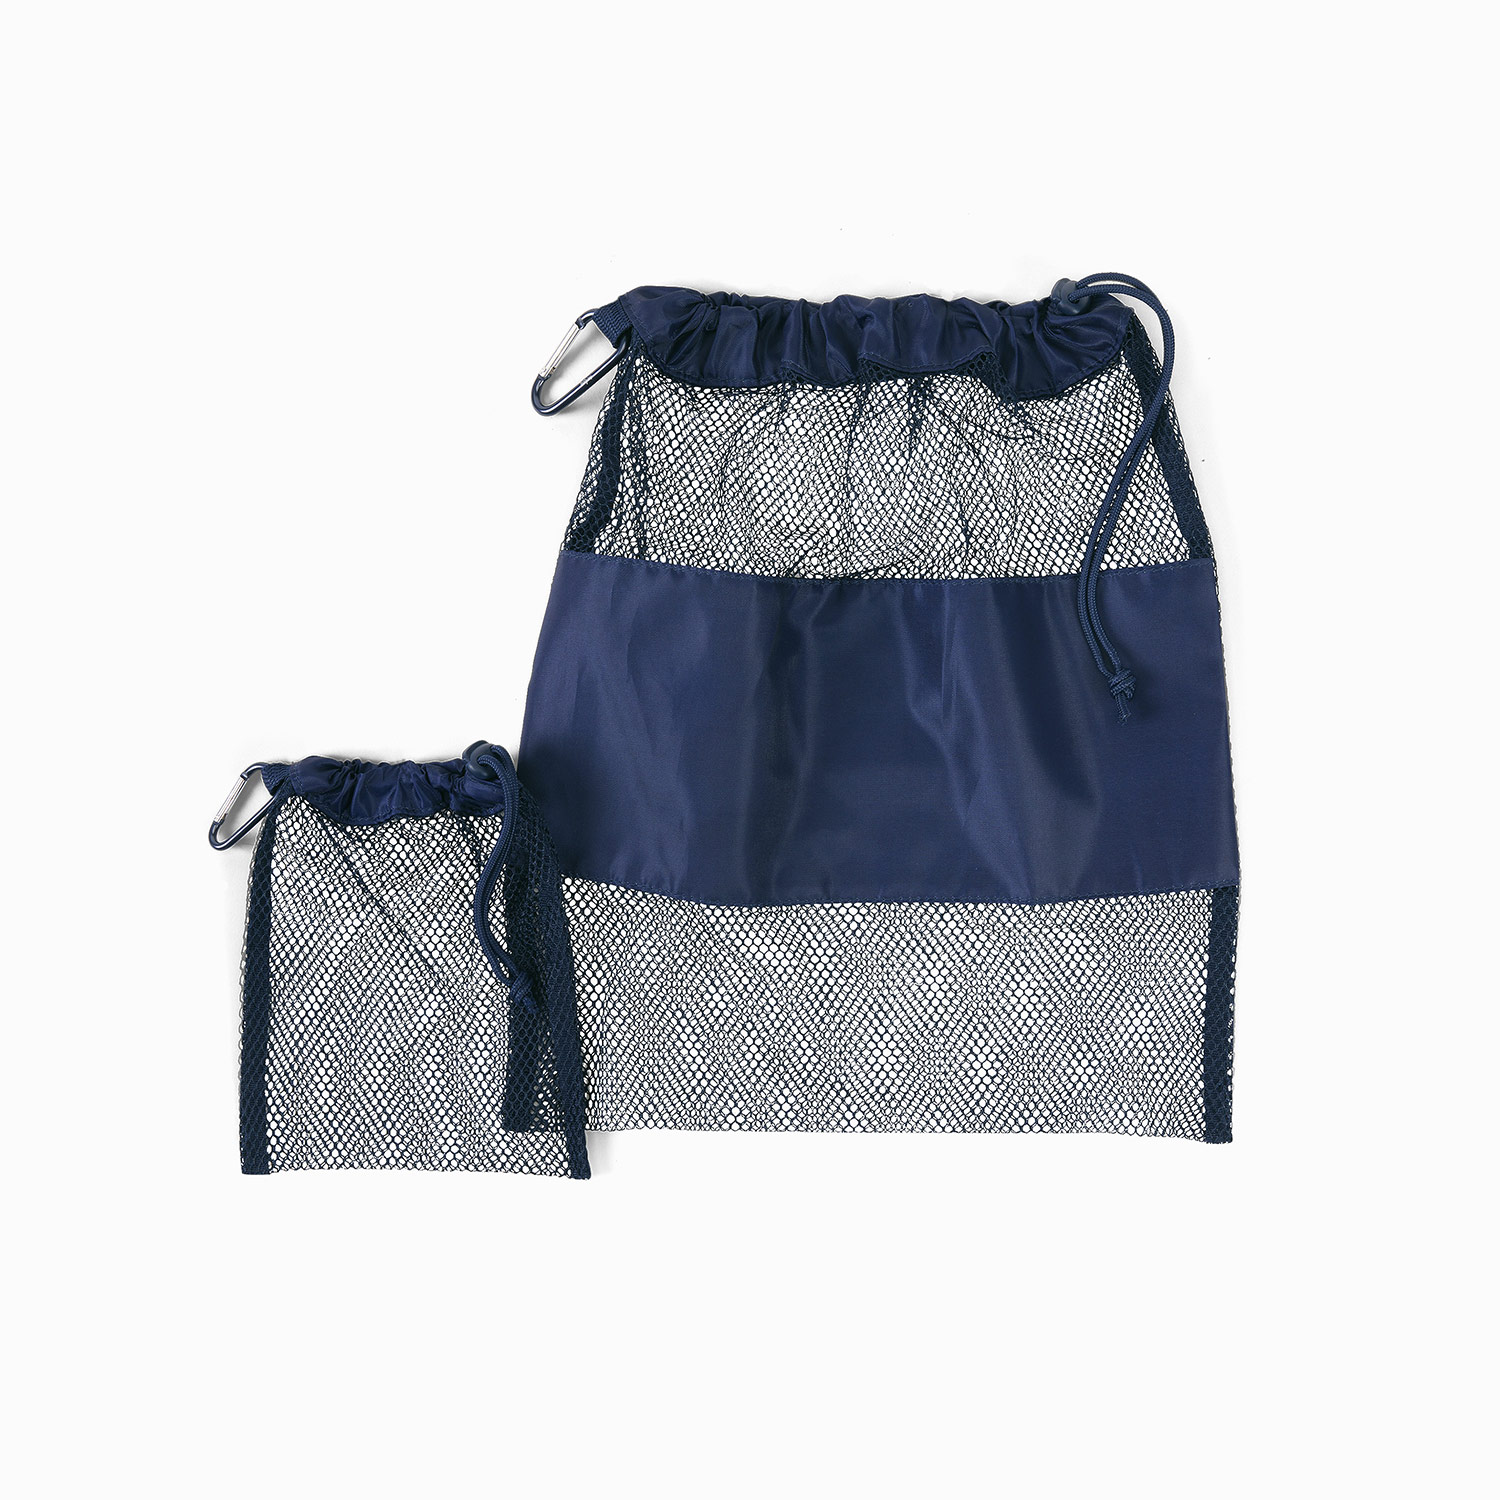 Small Mesh Bag - 4 x 3.5 – mineNOT YOURS